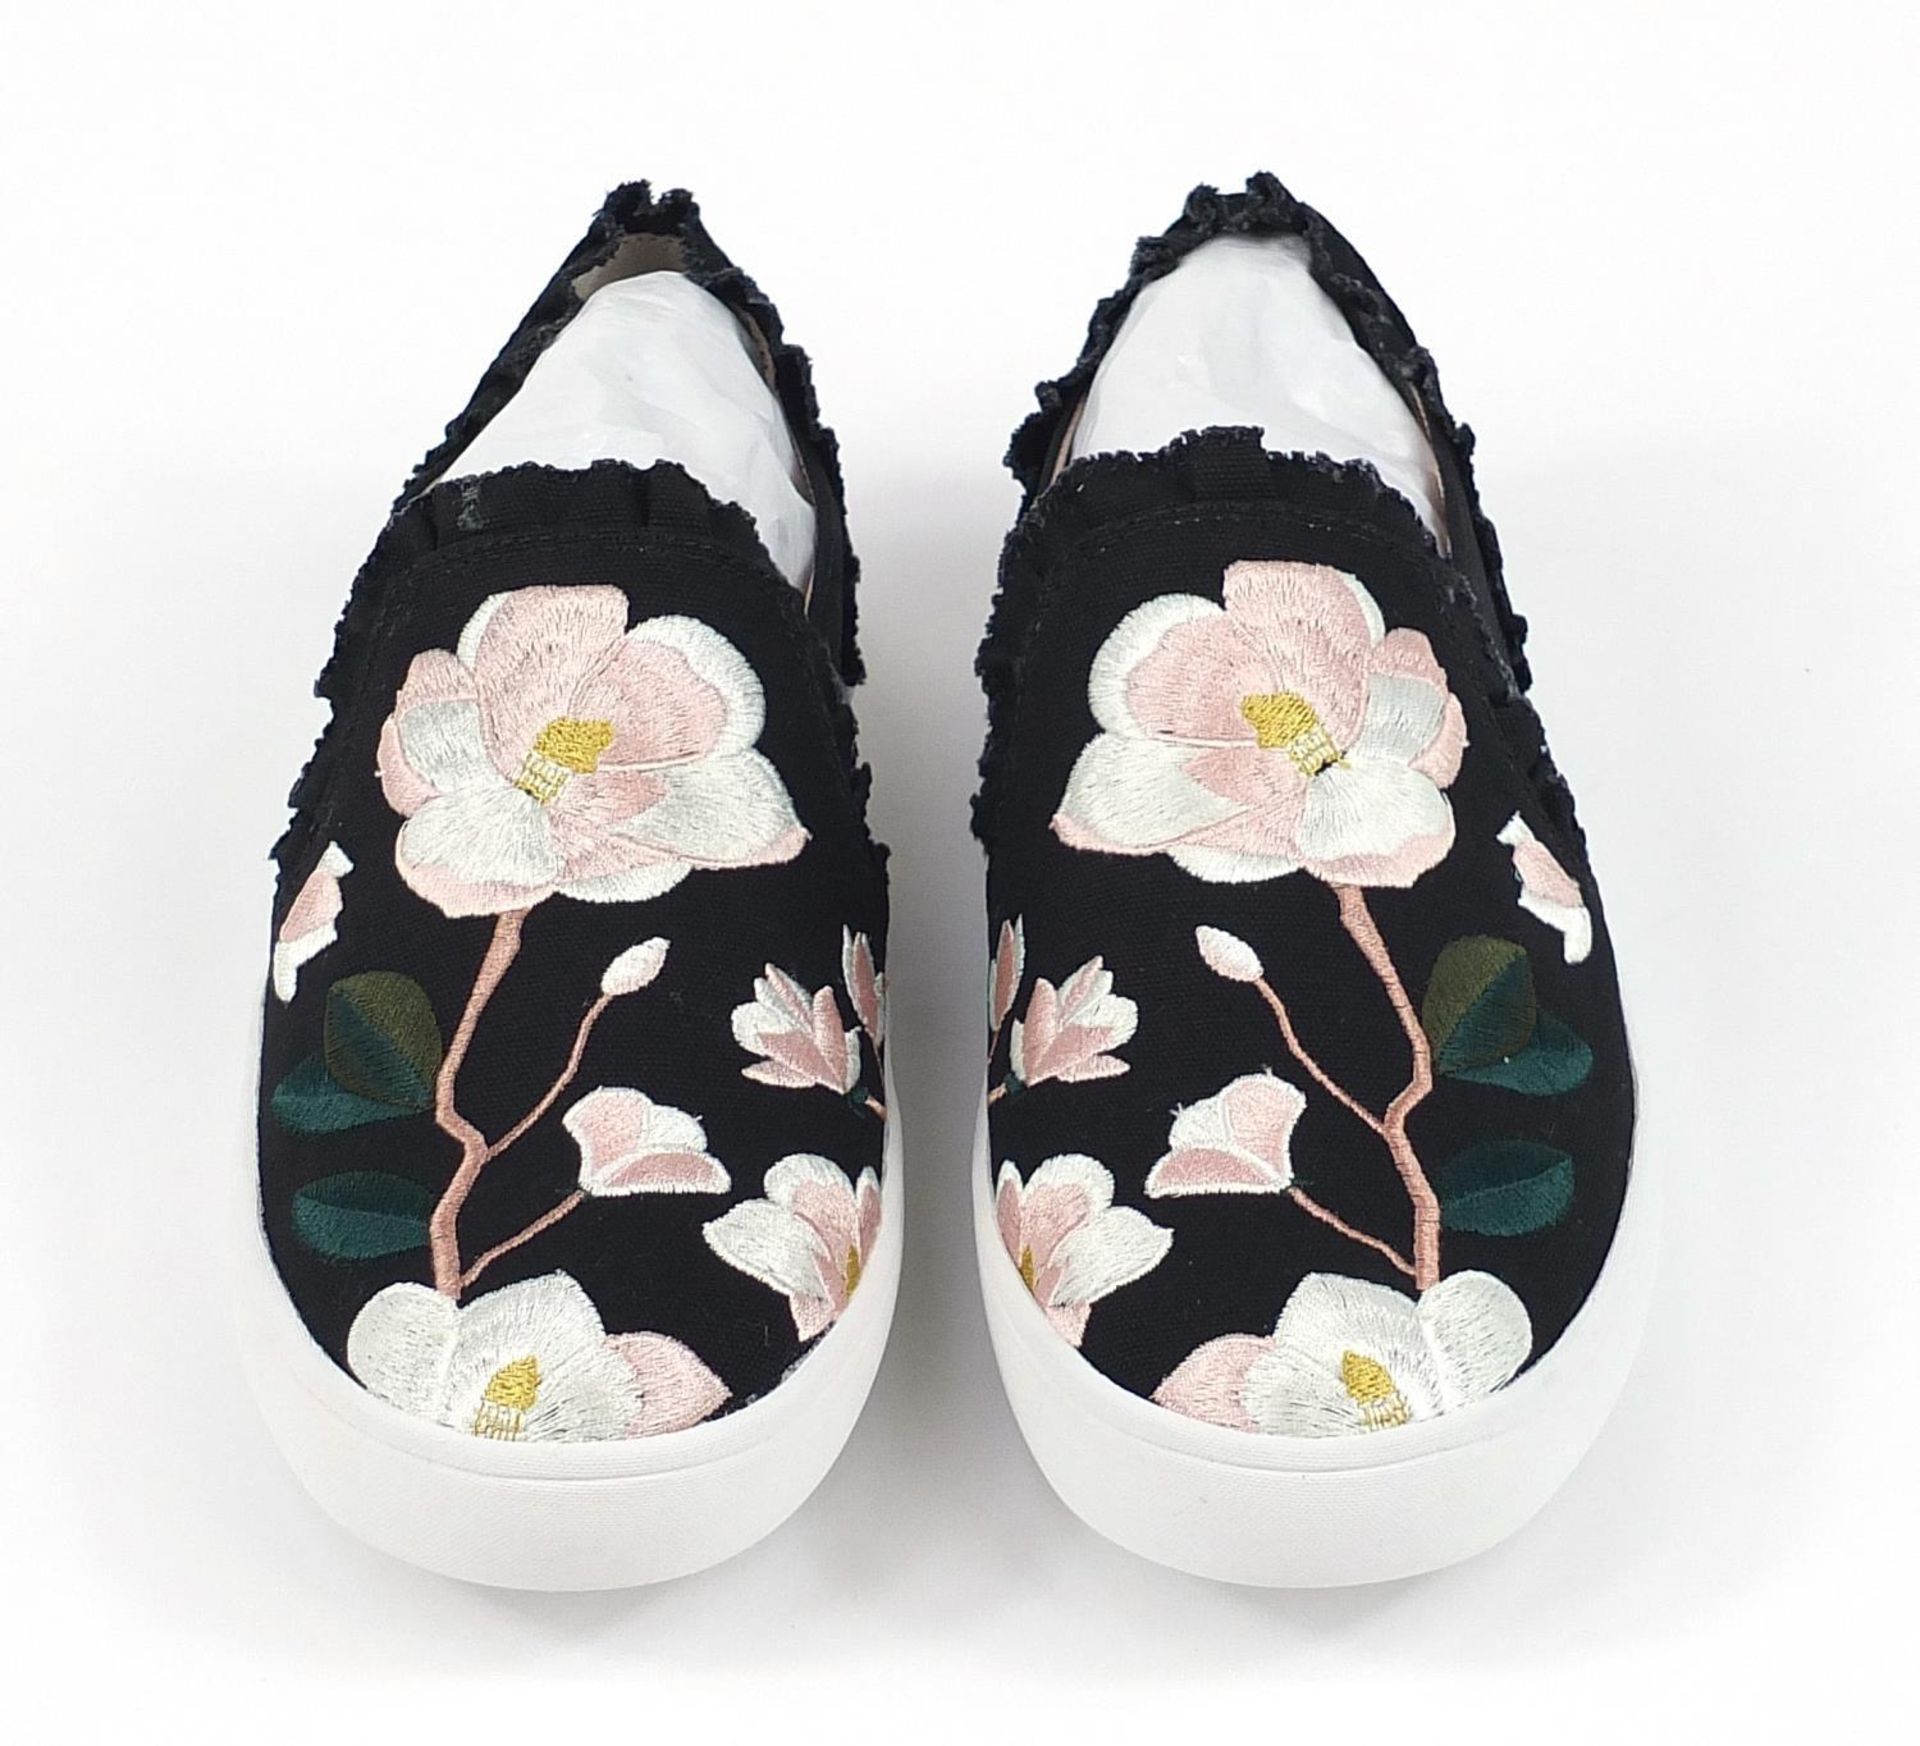 Kate Spade New York, pair of ladies' floral embroidered pumps - Image 2 of 7